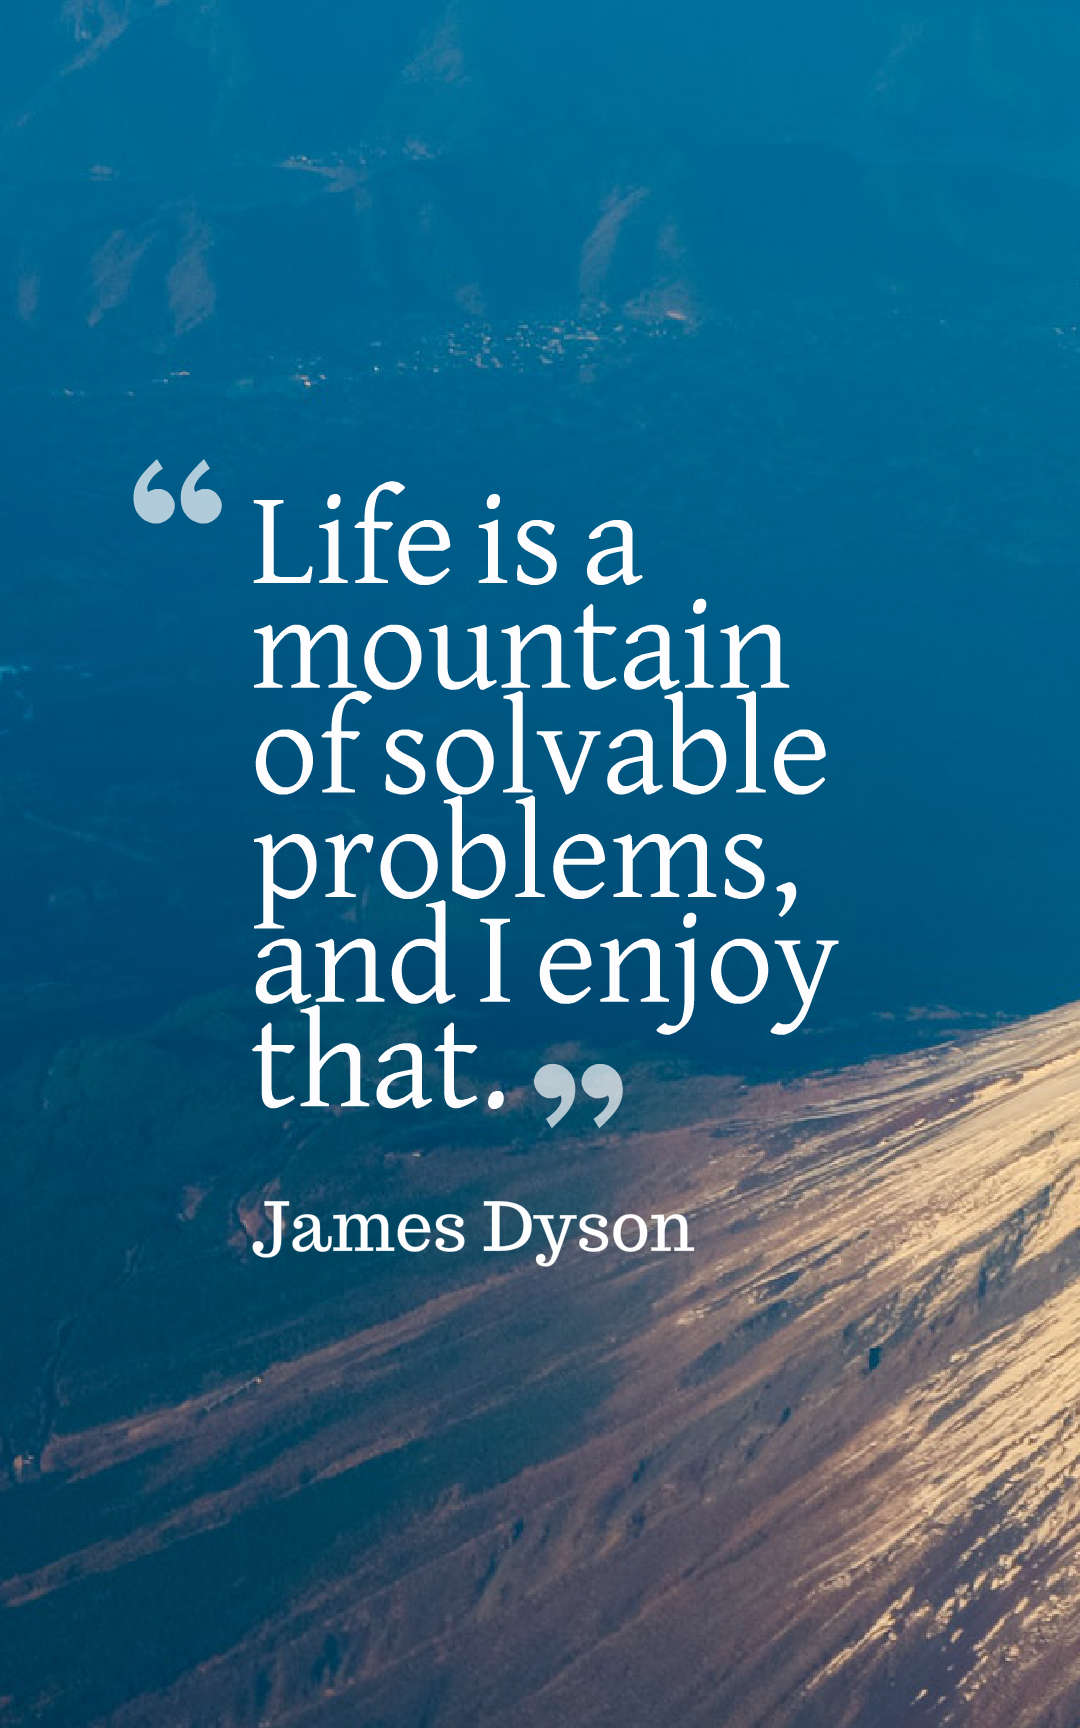 Life is a mountain of solvable problems, and I enjoy that.